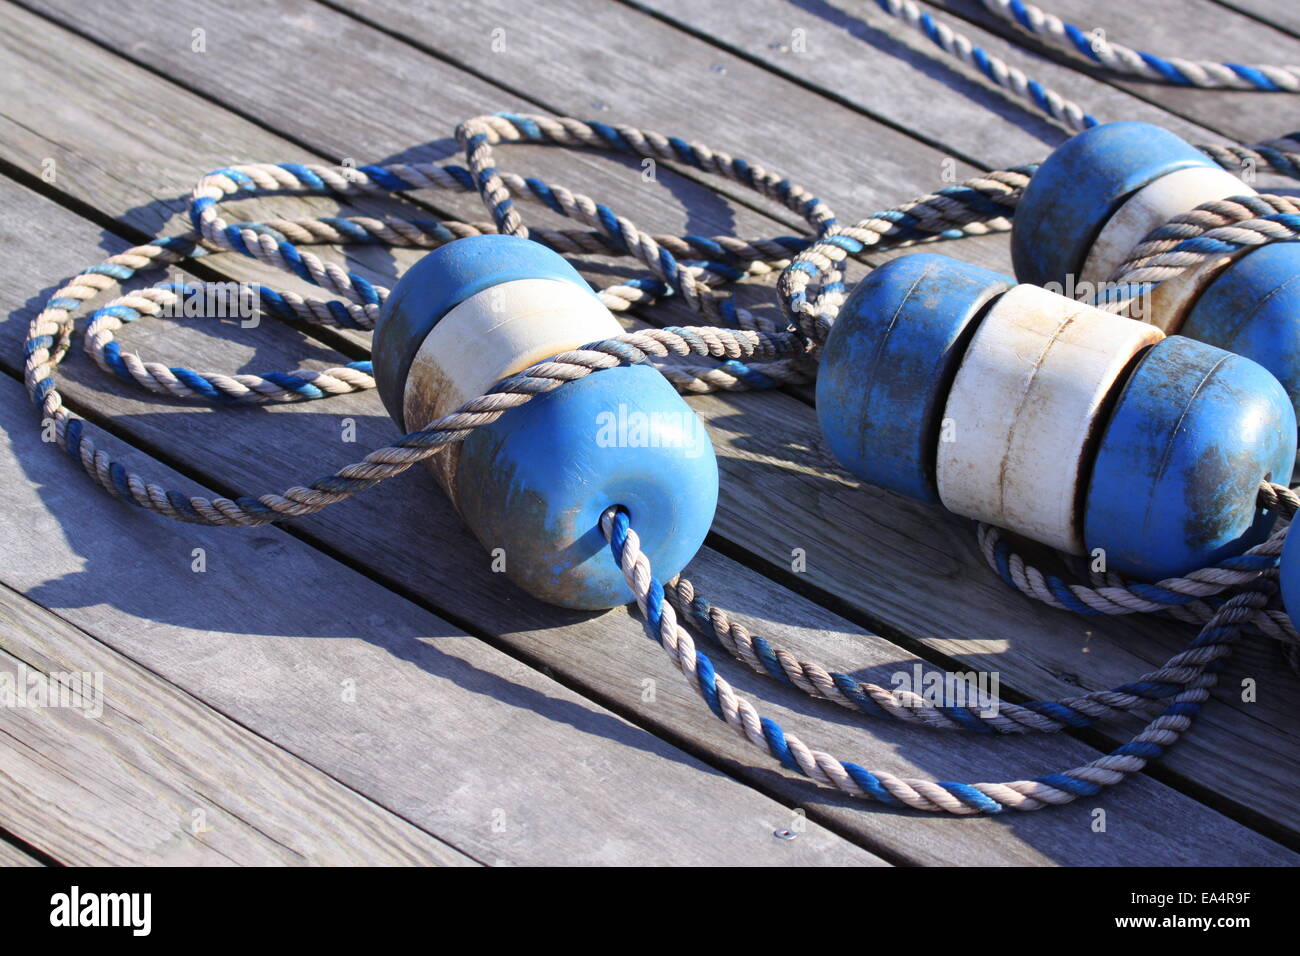 Nautical scene with blue buoys on a rope Stock Photo